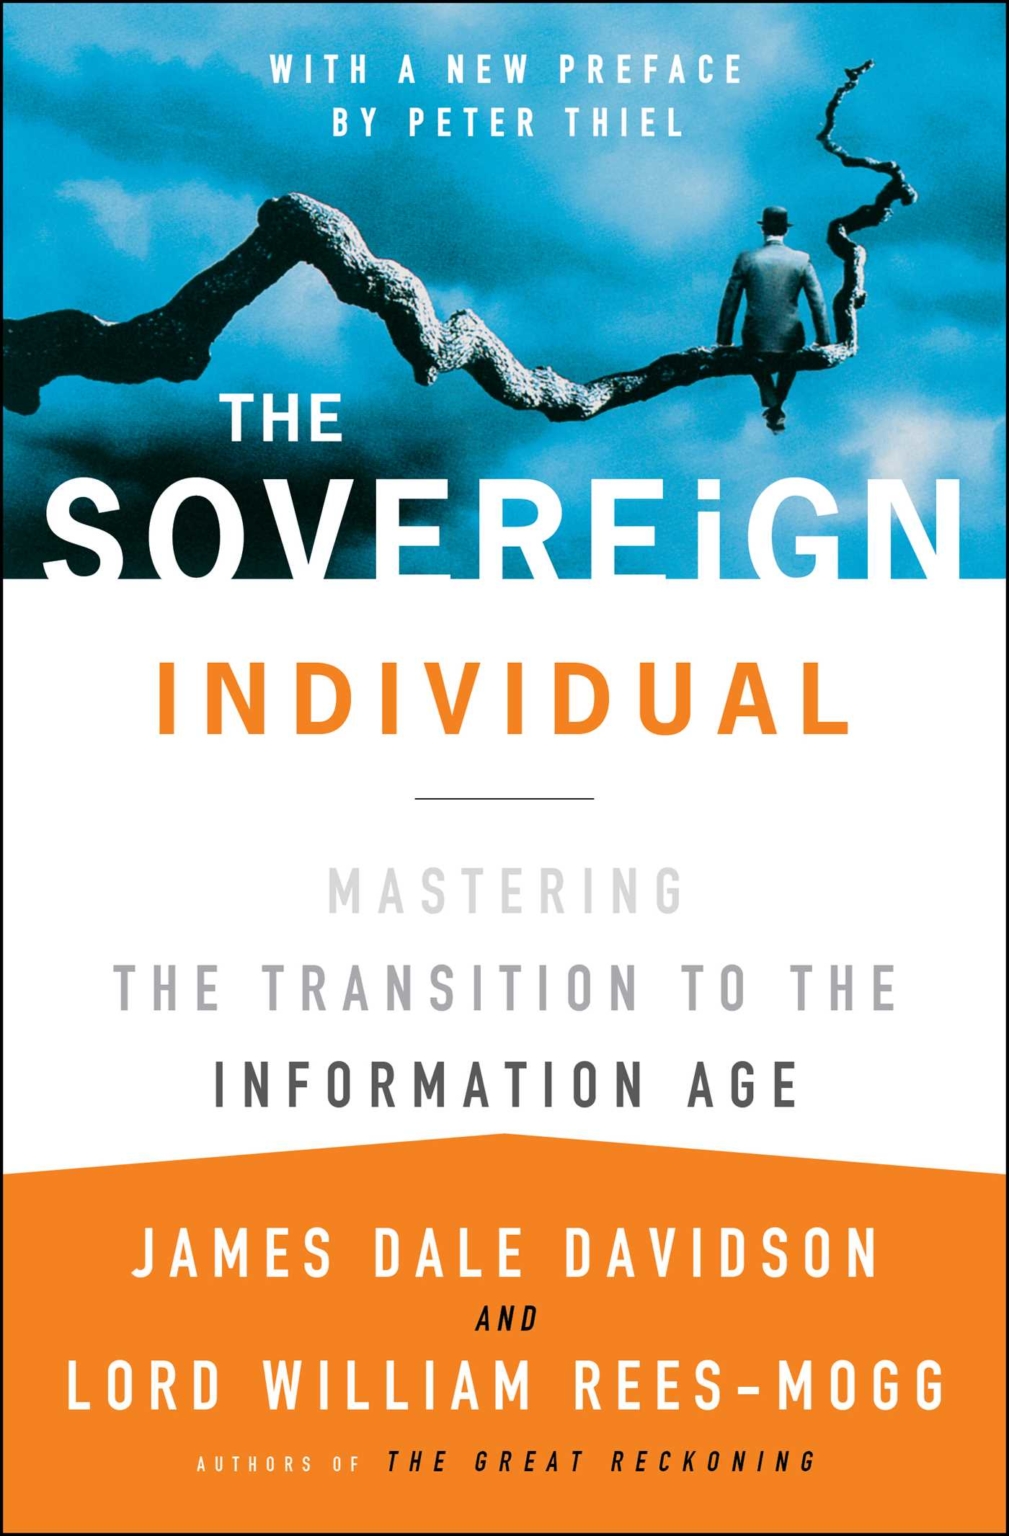 the sovereign individual: how to survive and thrive during the collapse of the welfare state